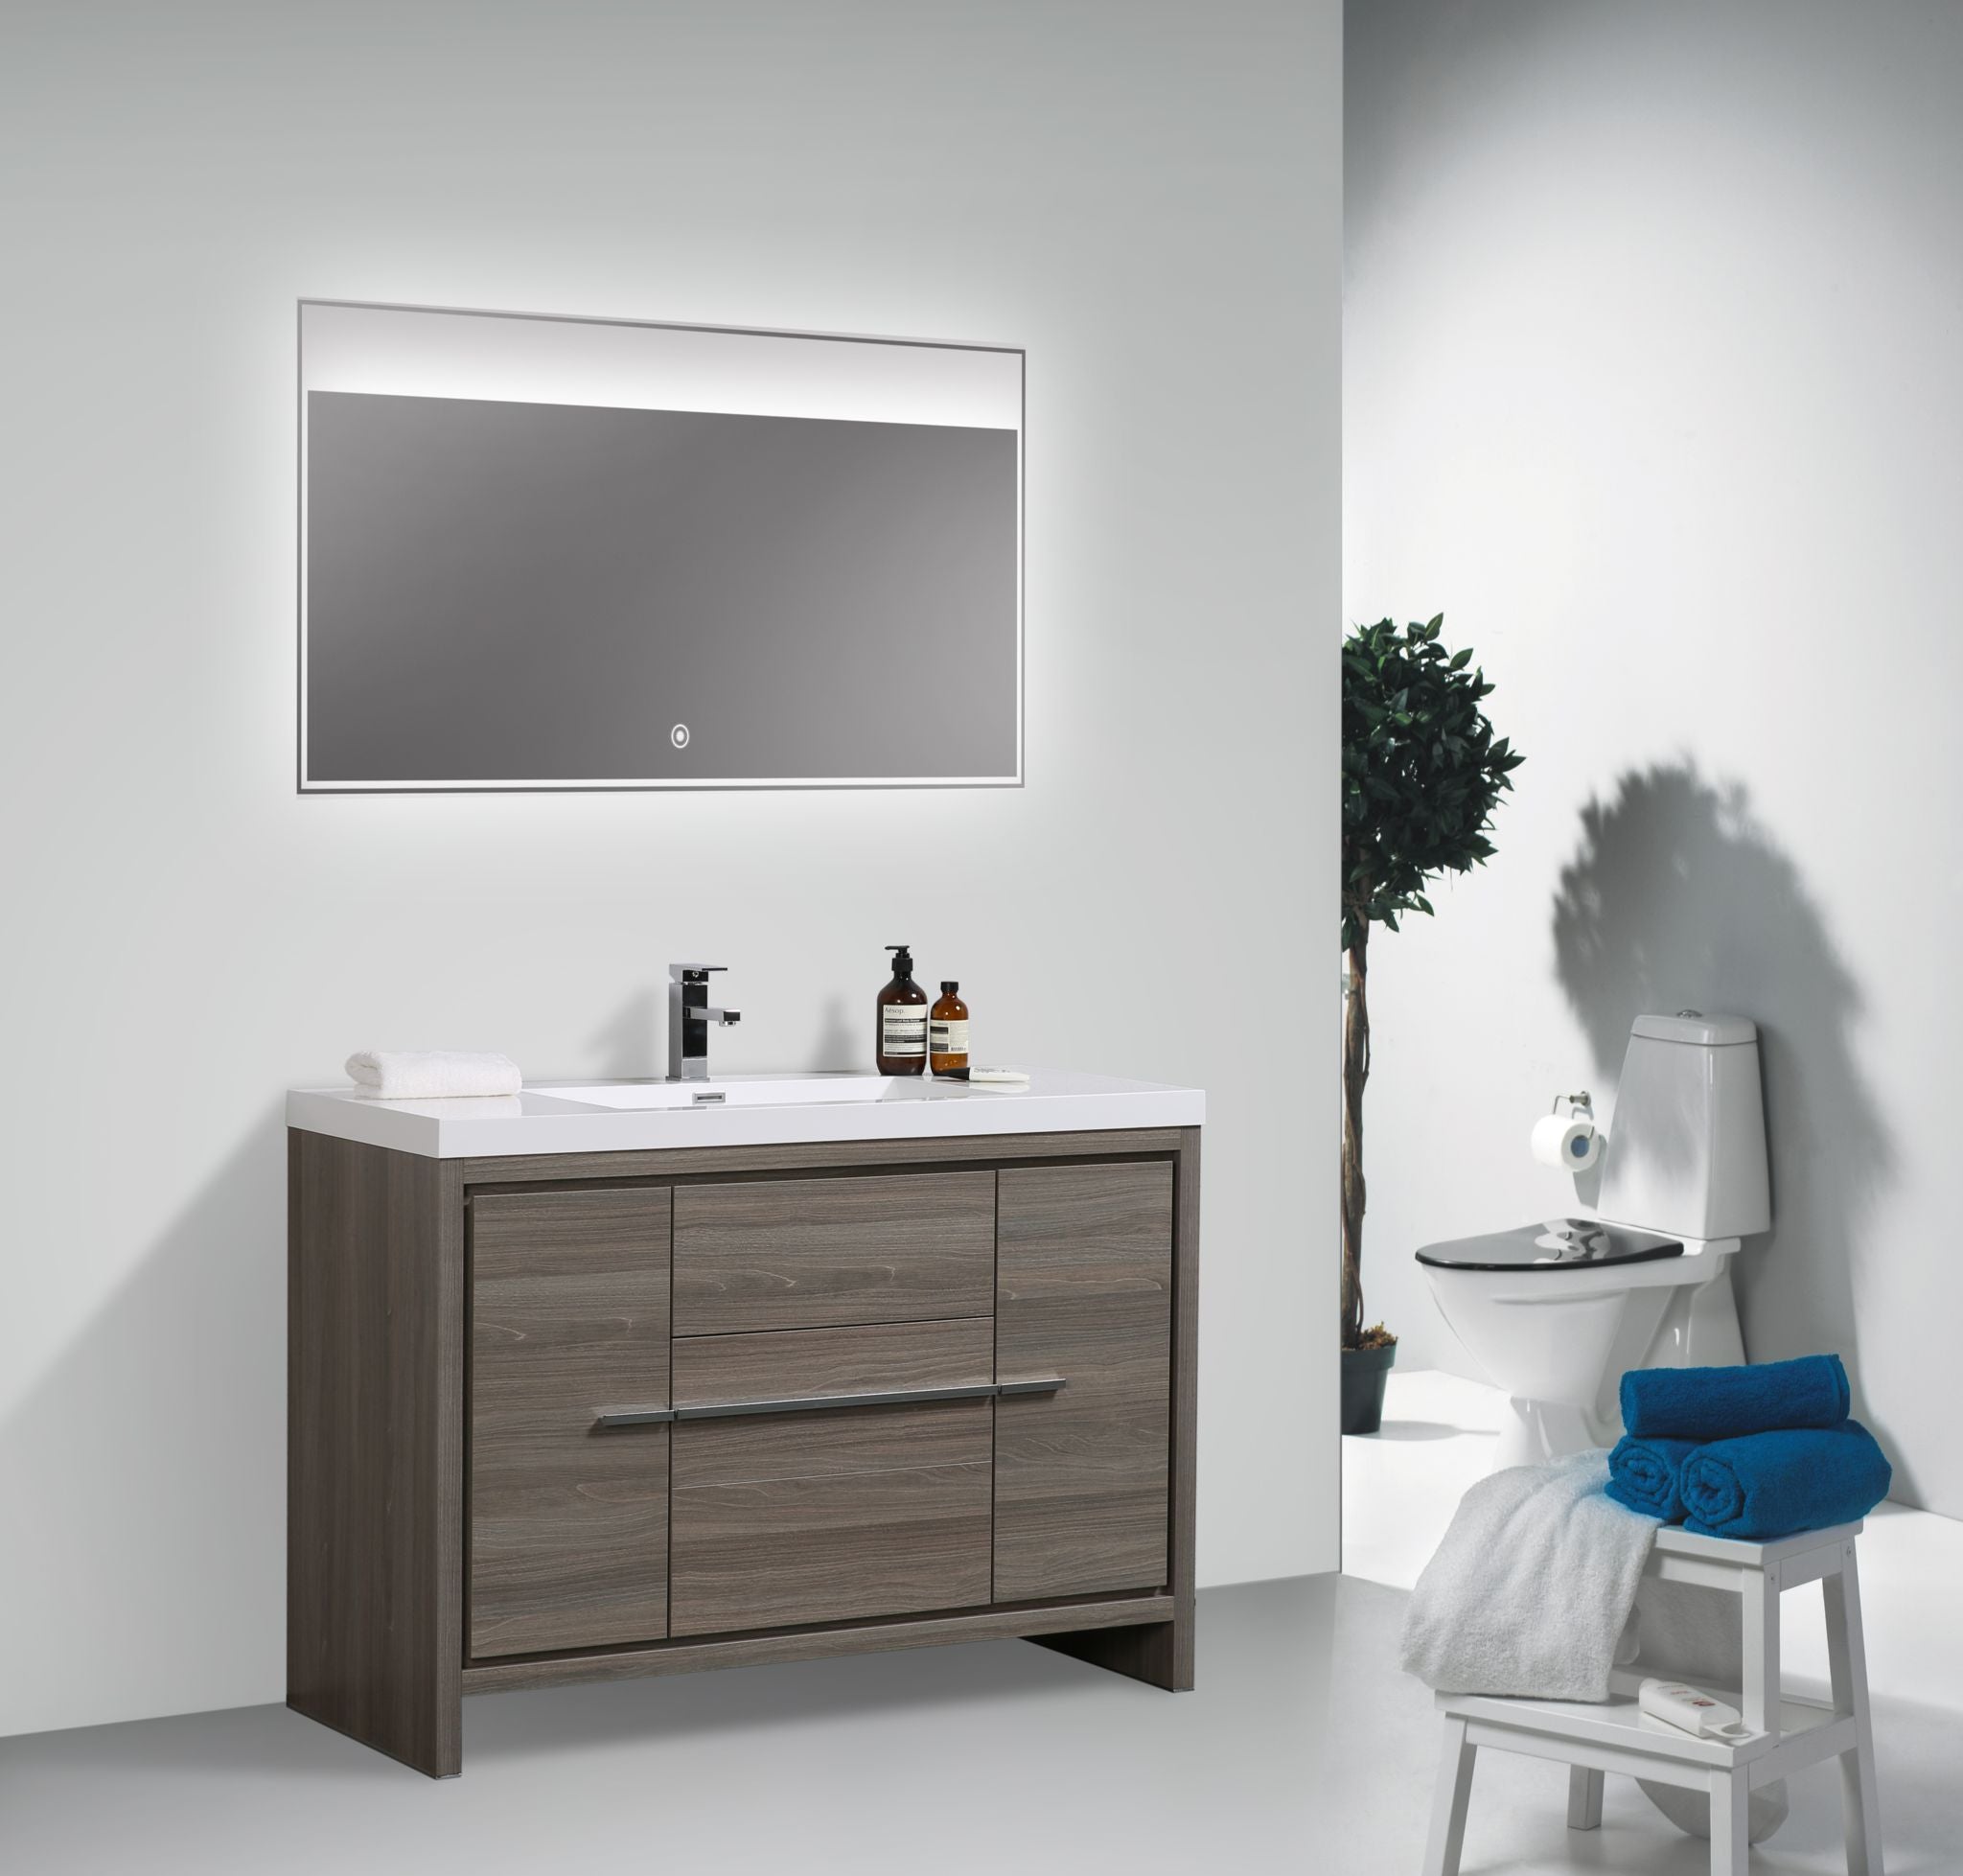 Granada 47.5 Maple Grey With Chrome Handle Cabinet, Square Cultured Marble Sink, Free Standing Modern Vanity Set